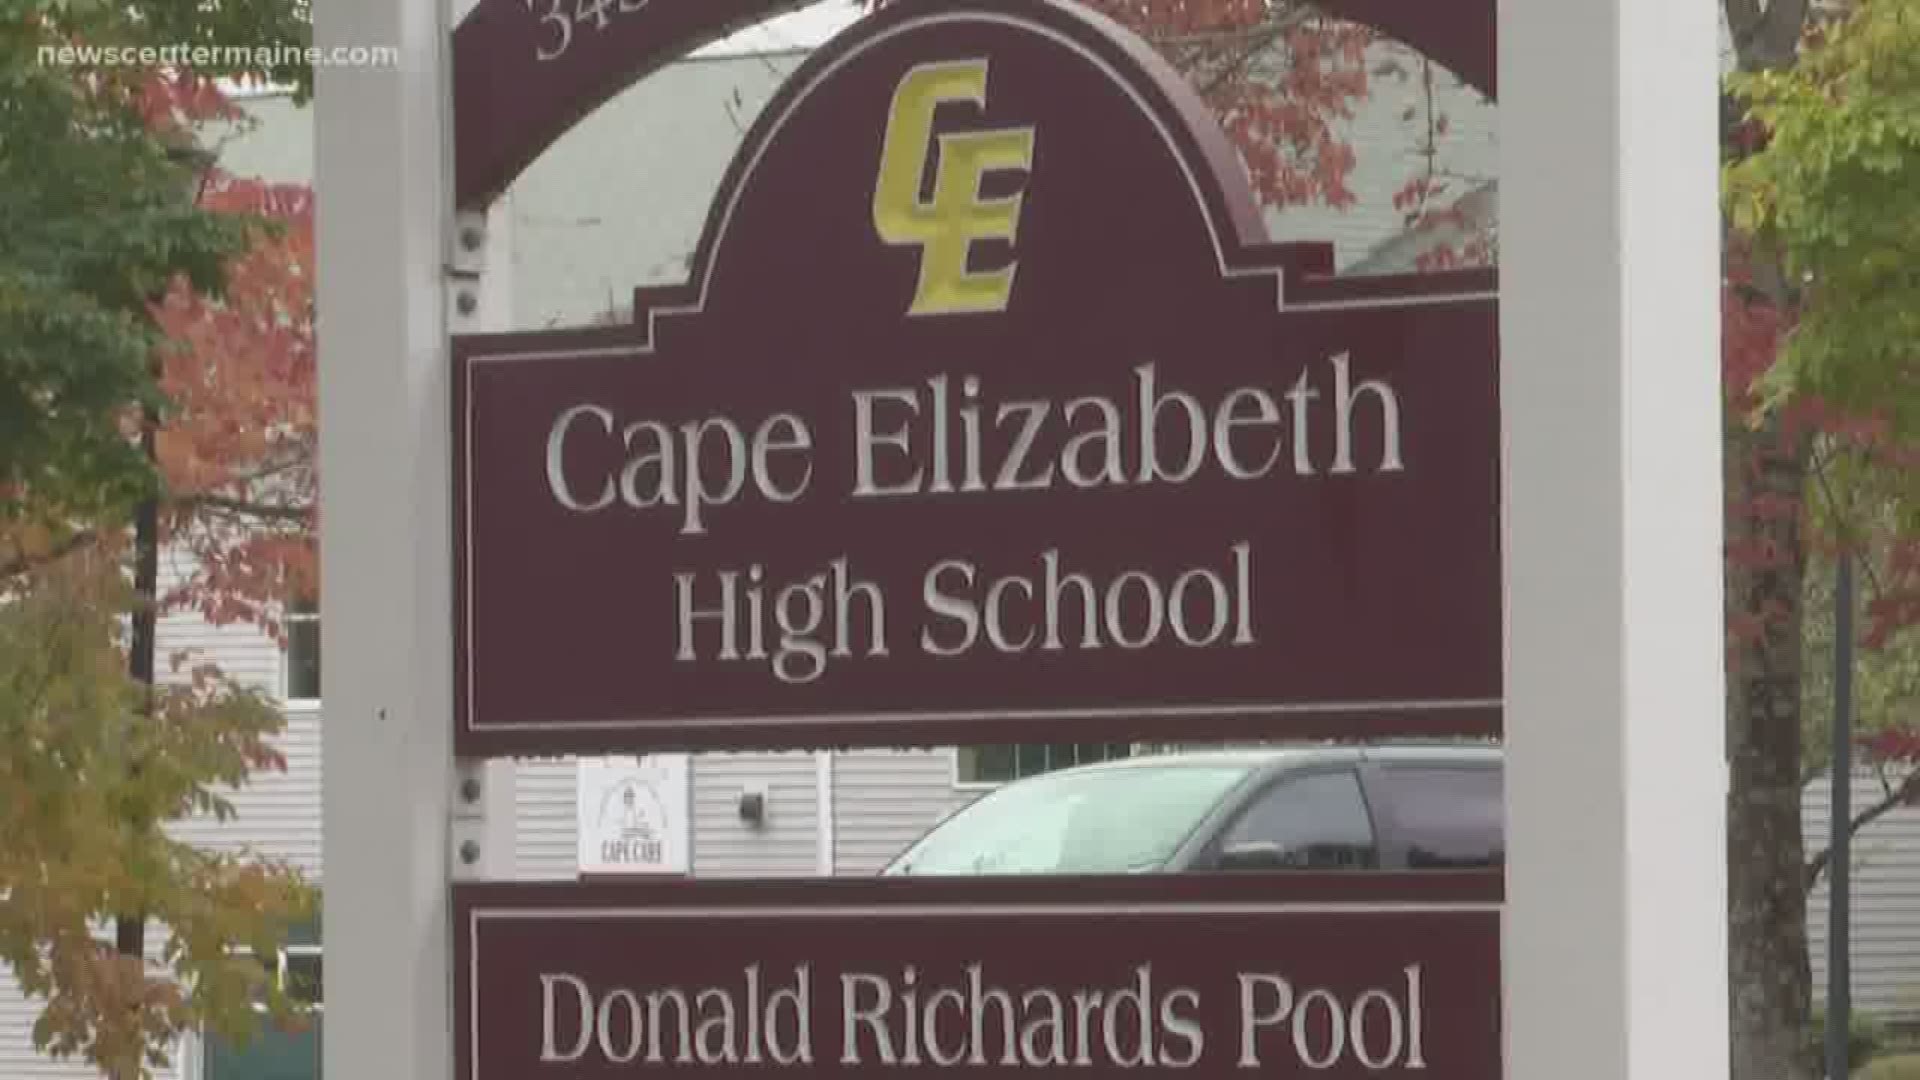 The controversy at Cape Elizabeth High School continues to unfold. The principal has sent a letter to parents about the handling of allegations of sexual assaults.